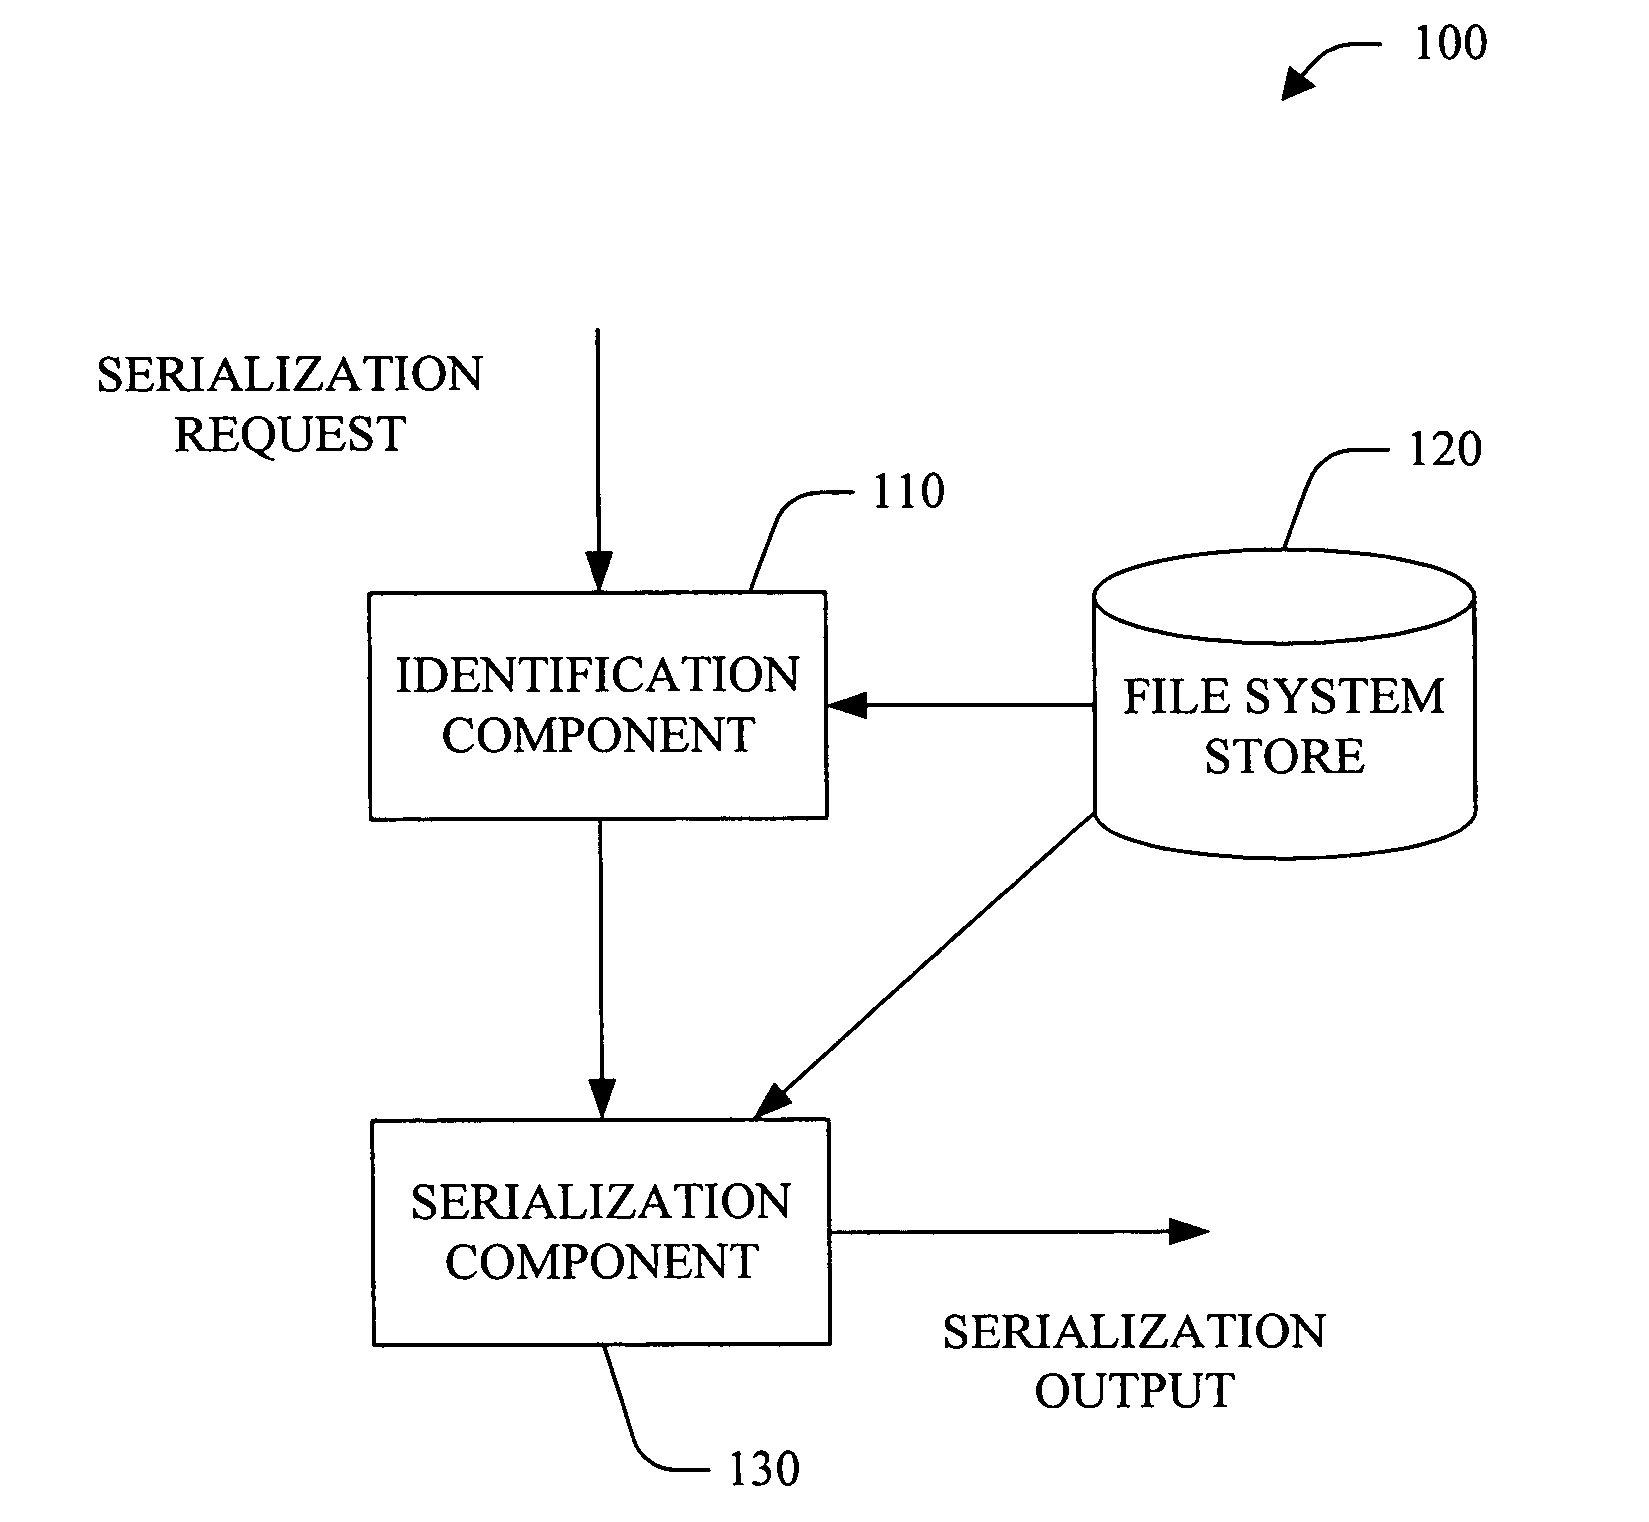 Serialization of file system item(s) and associated entity(ies)